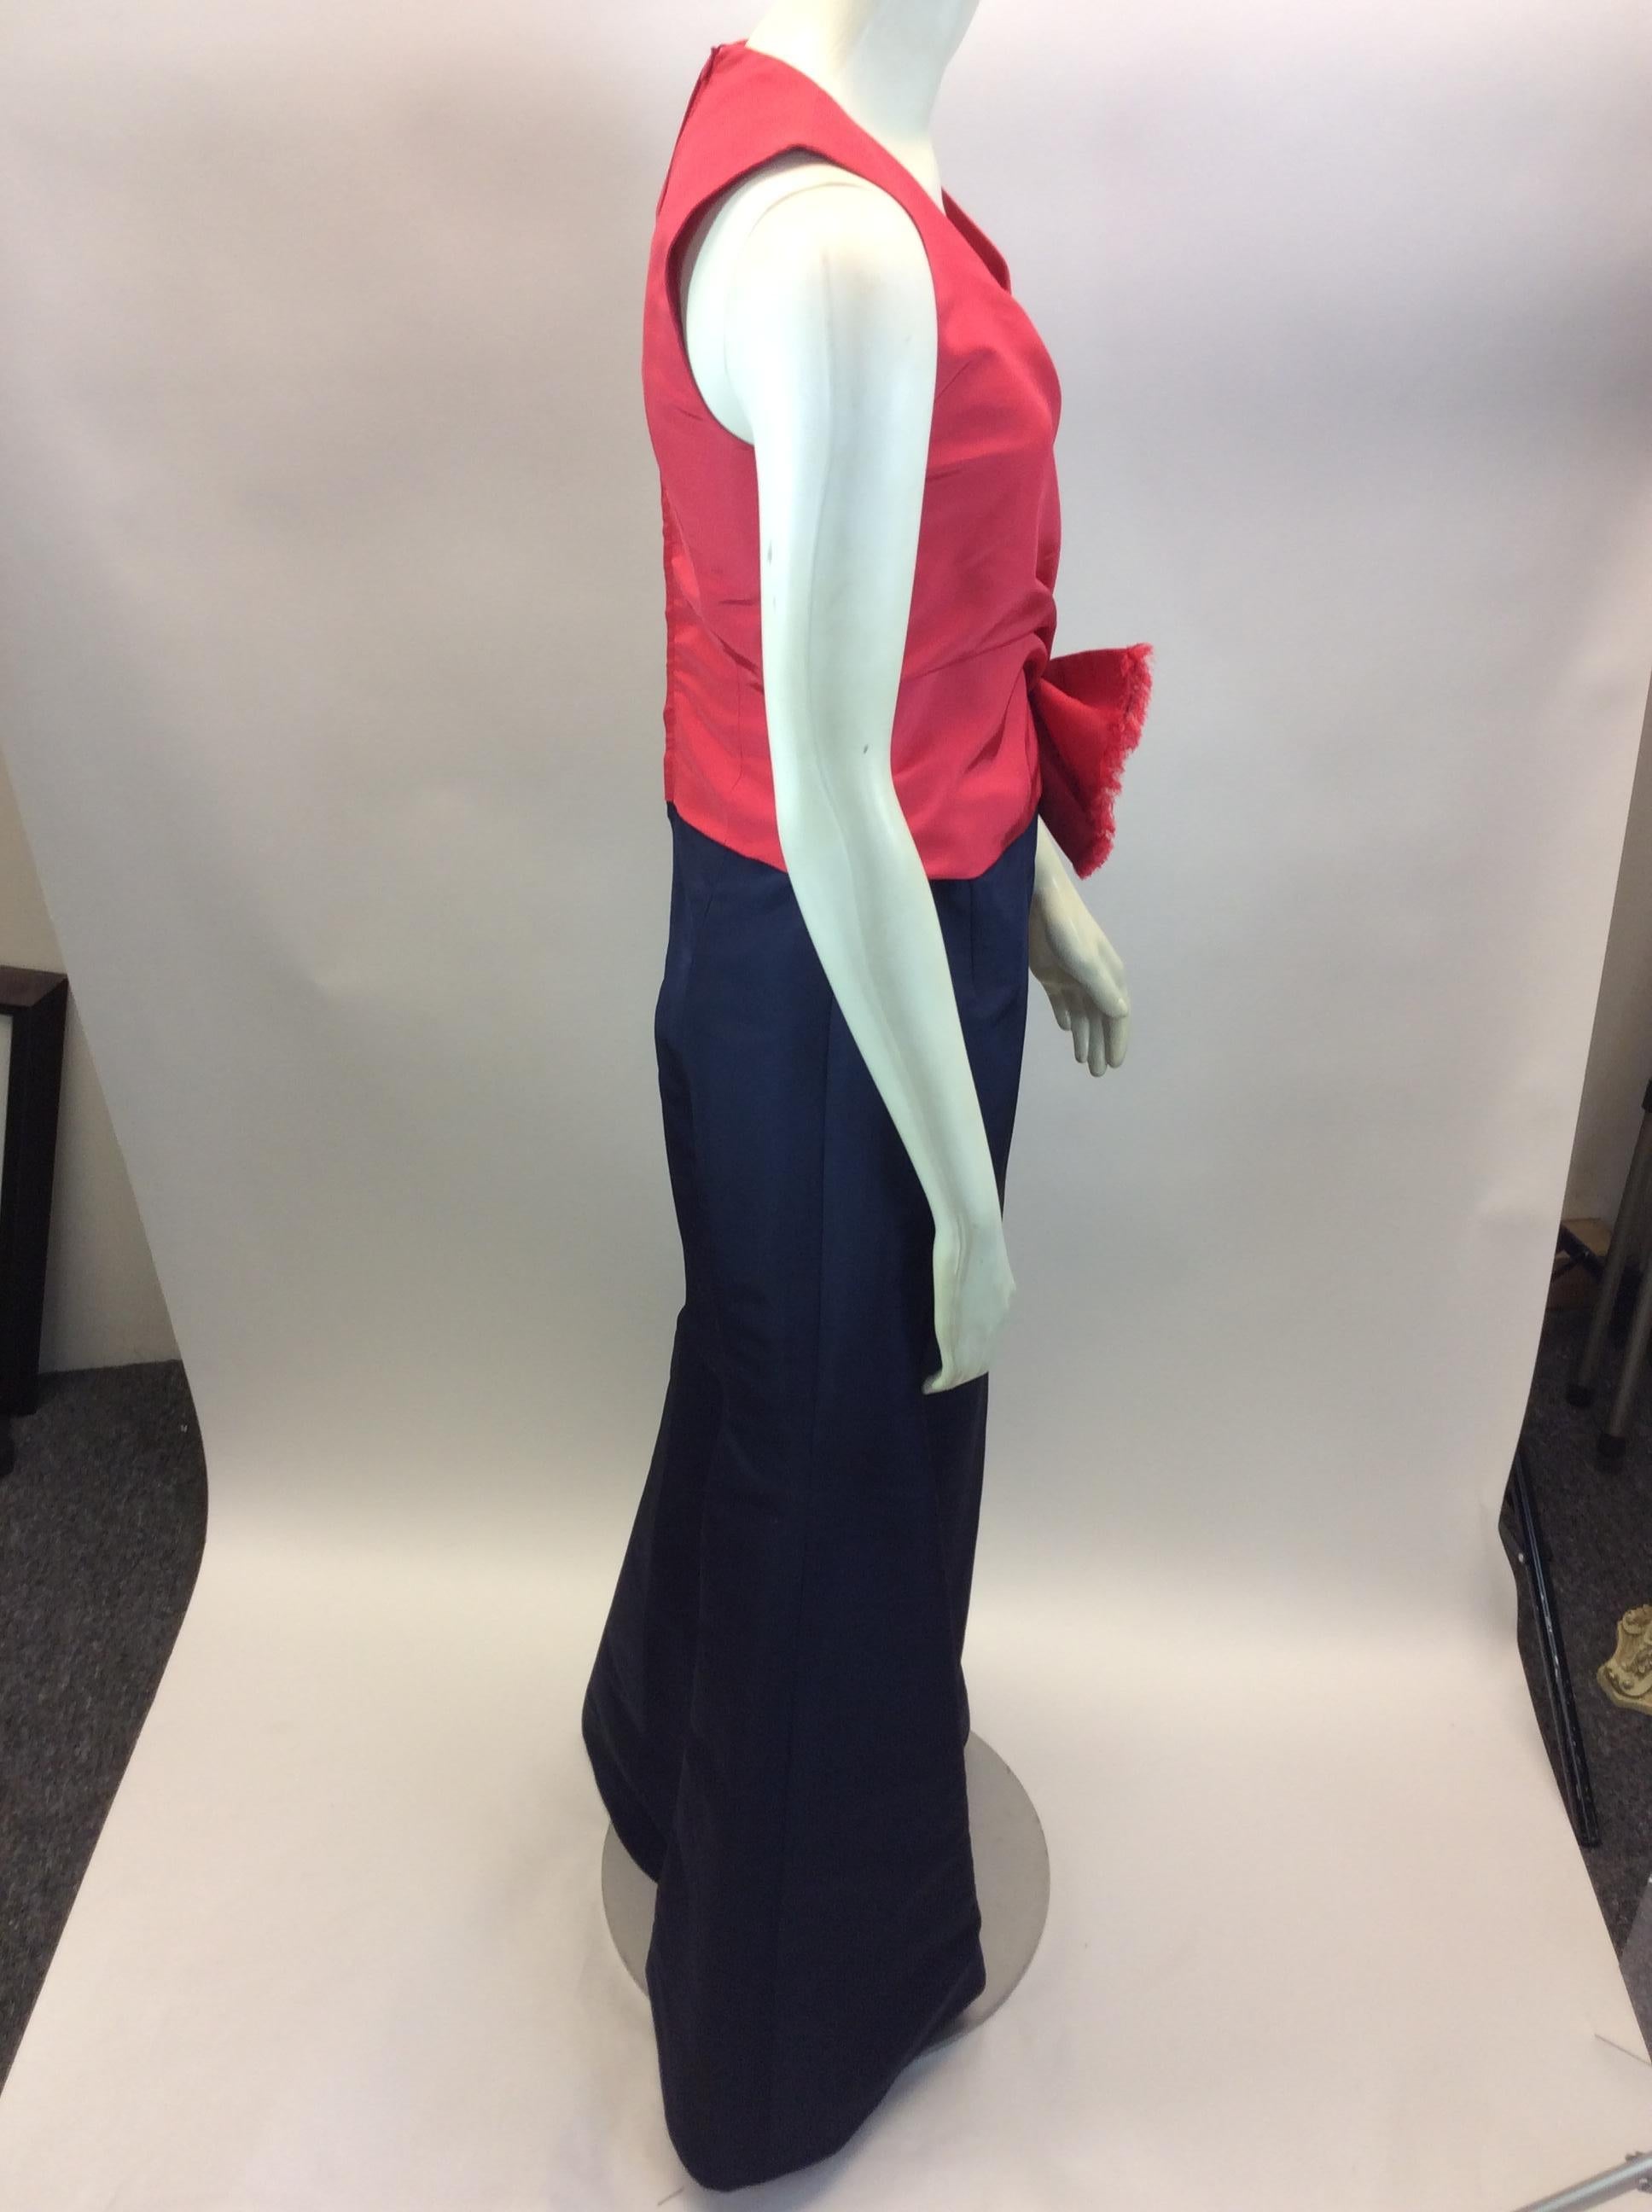 Carolina Herrera Red and Navy Blue Formal Gown In Good Condition For Sale In Narberth, PA